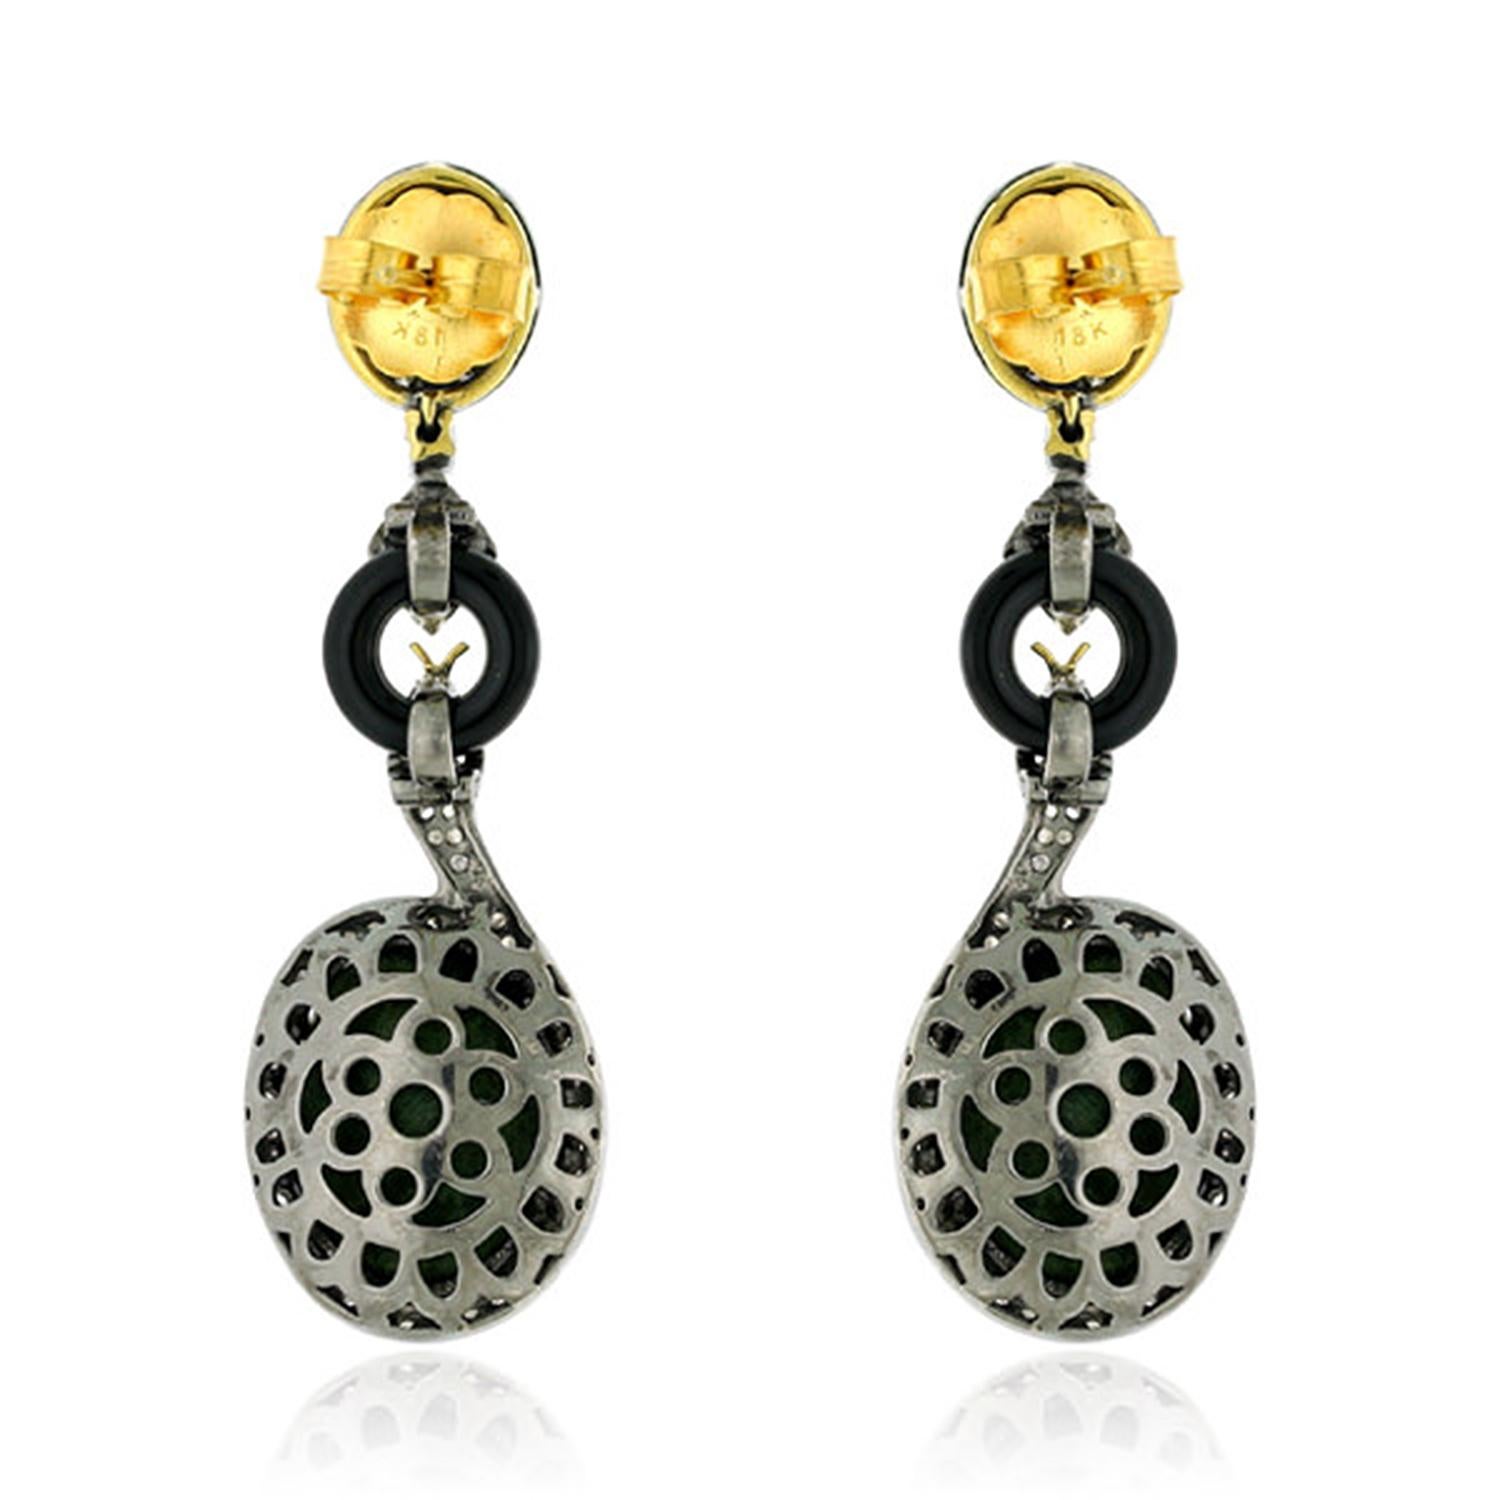 These handcrafted earrings are cast in 18-karat gold & sterling silver. It is set with geodes, 3.25 carats Kyanite, 3.2 carats onyx and 1.19 carats of sparkling diamonds.

FOLLOW  MEGHNA JEWELS storefront to view the latest collection & exclusive